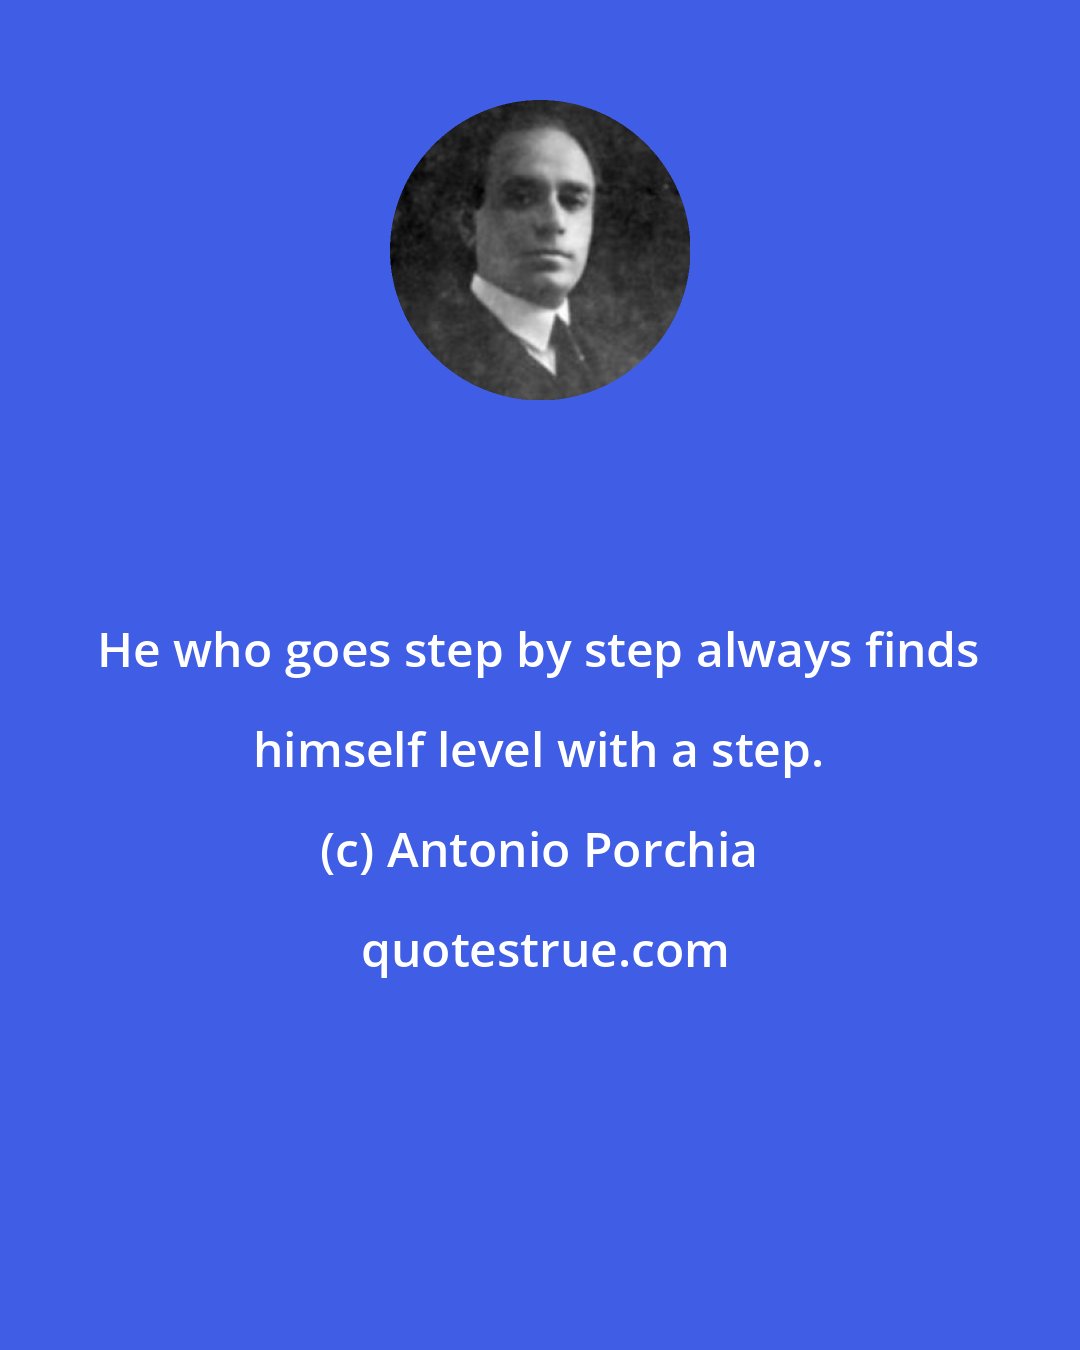 Antonio Porchia: He who goes step by step always finds himself level with a step.